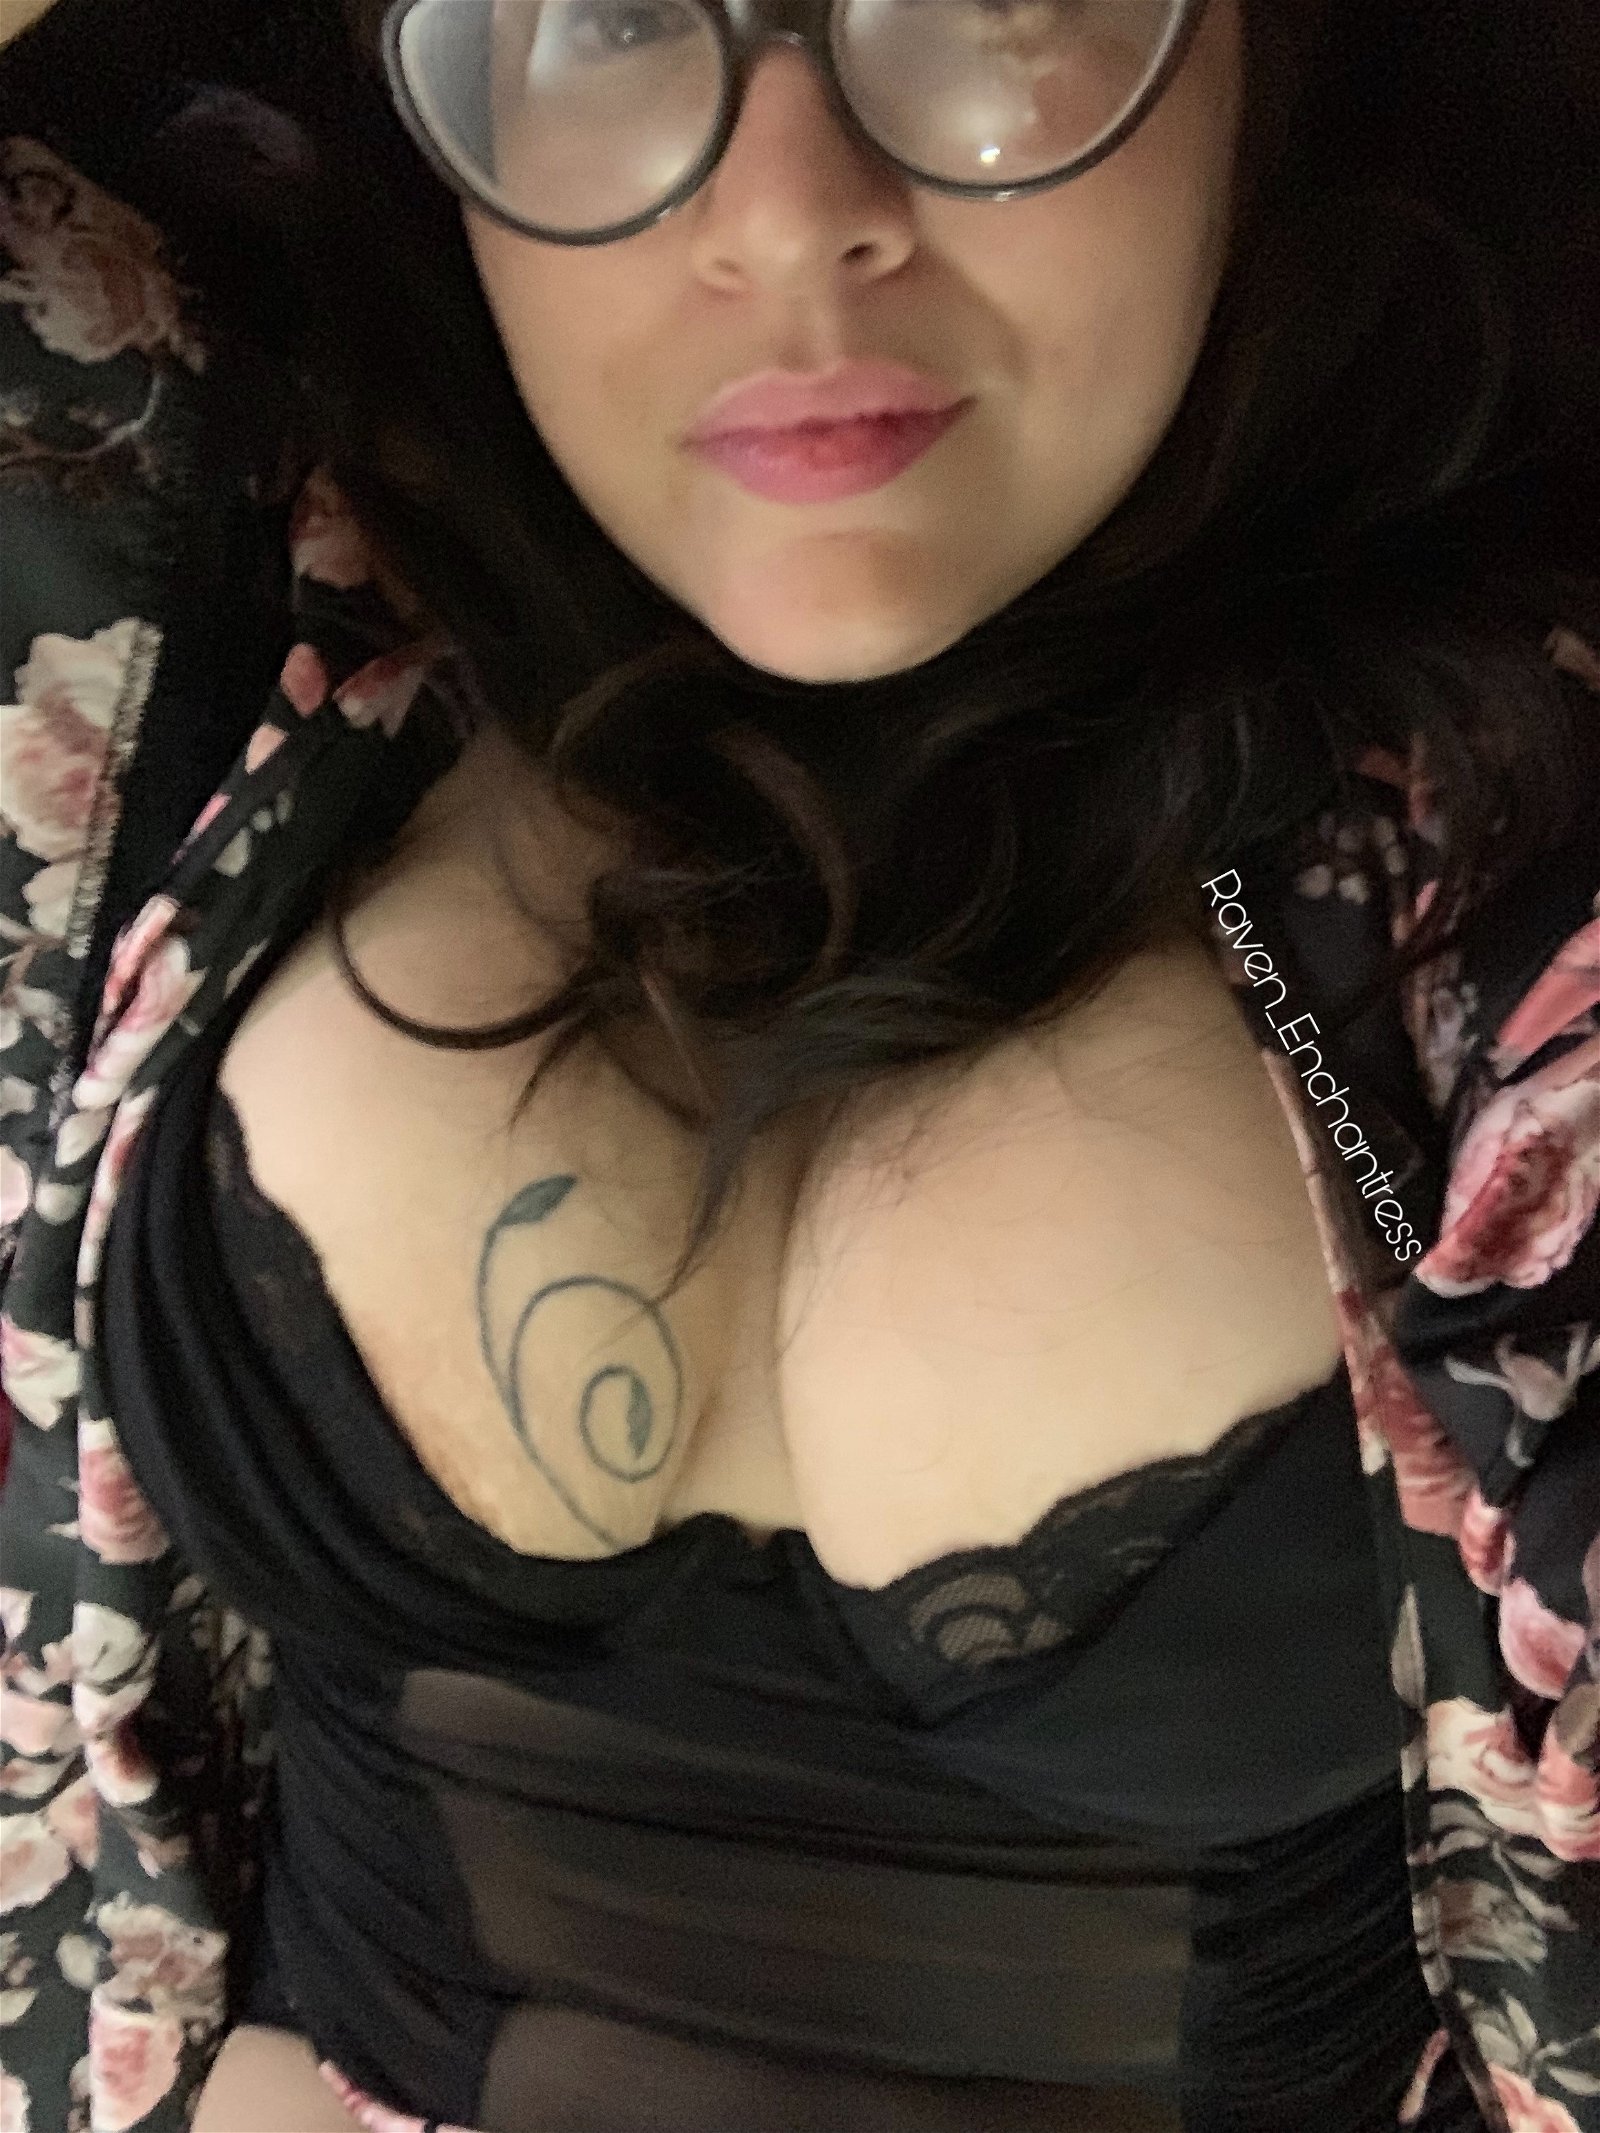 Photo by Raven_Enchantress with the username @curvyraven, who is a star user,  March 12, 2020 at 12:44 PM and the text says 'I wonder if your girlfriend would be jealous if she knew you jerk your cock to me?

#girlfriend #busty #sexyselfie #selfie #manyvids #streamatemodel #model #webcamgirl 

https://raven_enchantress.manyvids.com/'